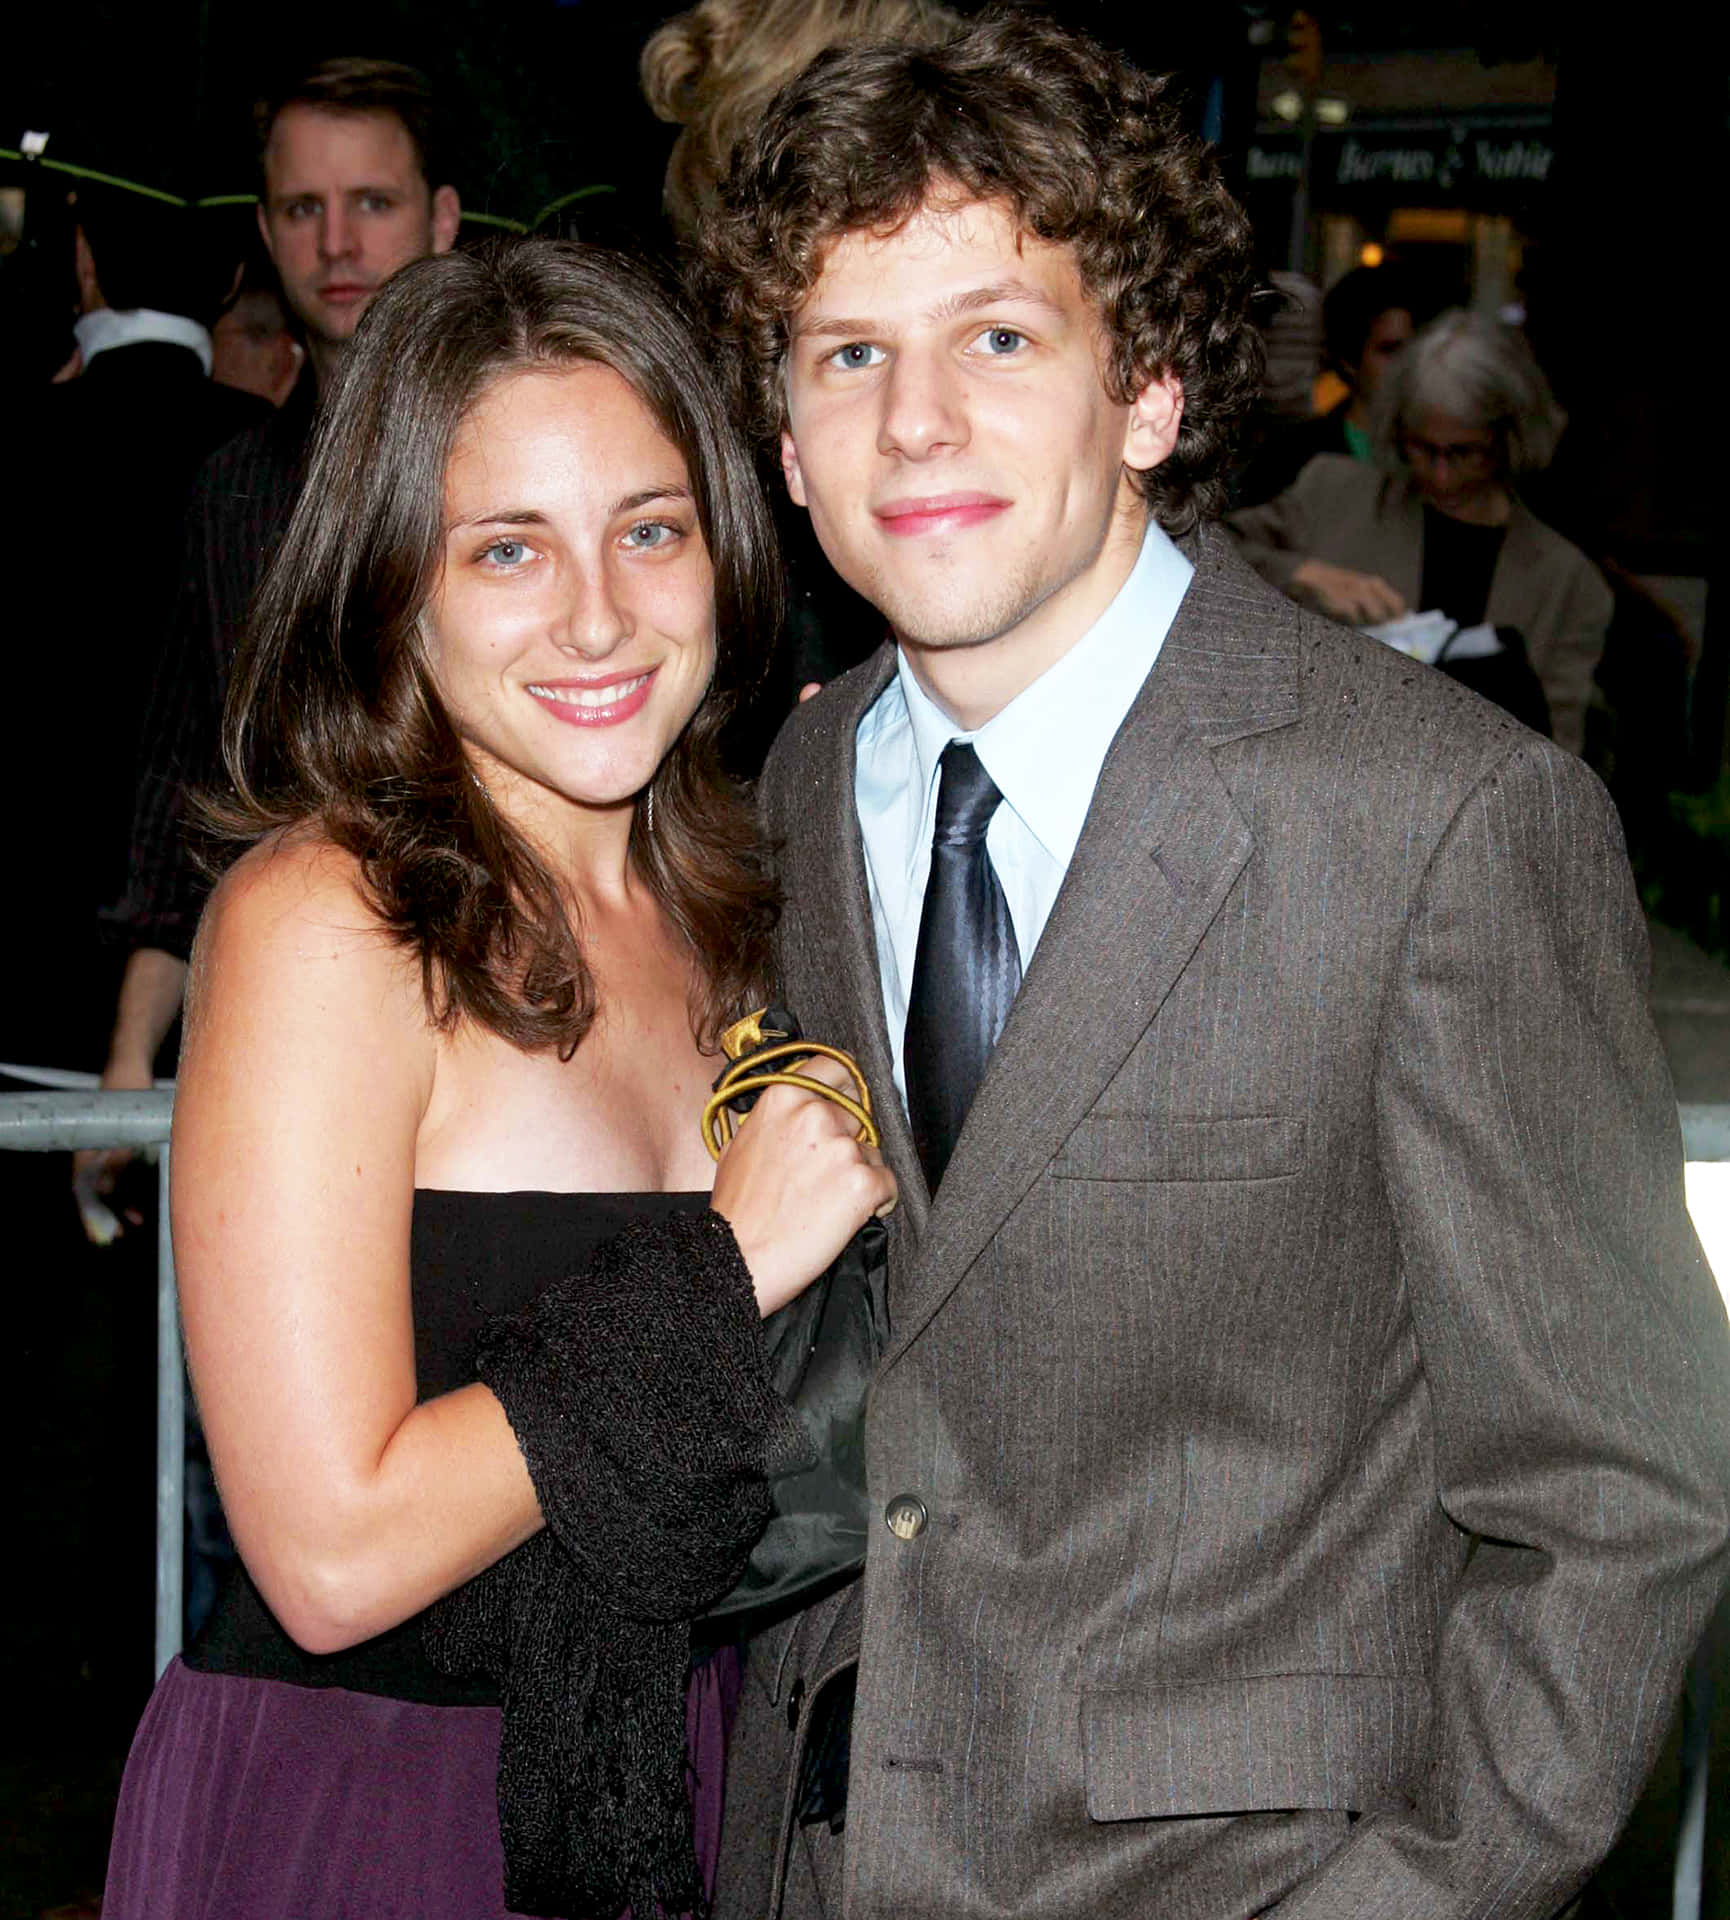 Jesseeisenberg Is An American Actor Known For His Roles In Movies Such As The Social Network And Zombieland. He Has Also Appeared In Plays And Has Written And Performed In Off-broadway Shows. Eisenberg Has Been Nominated For Various Awards And Has Won Critical Acclaim For His Performances. Fondo de pantalla